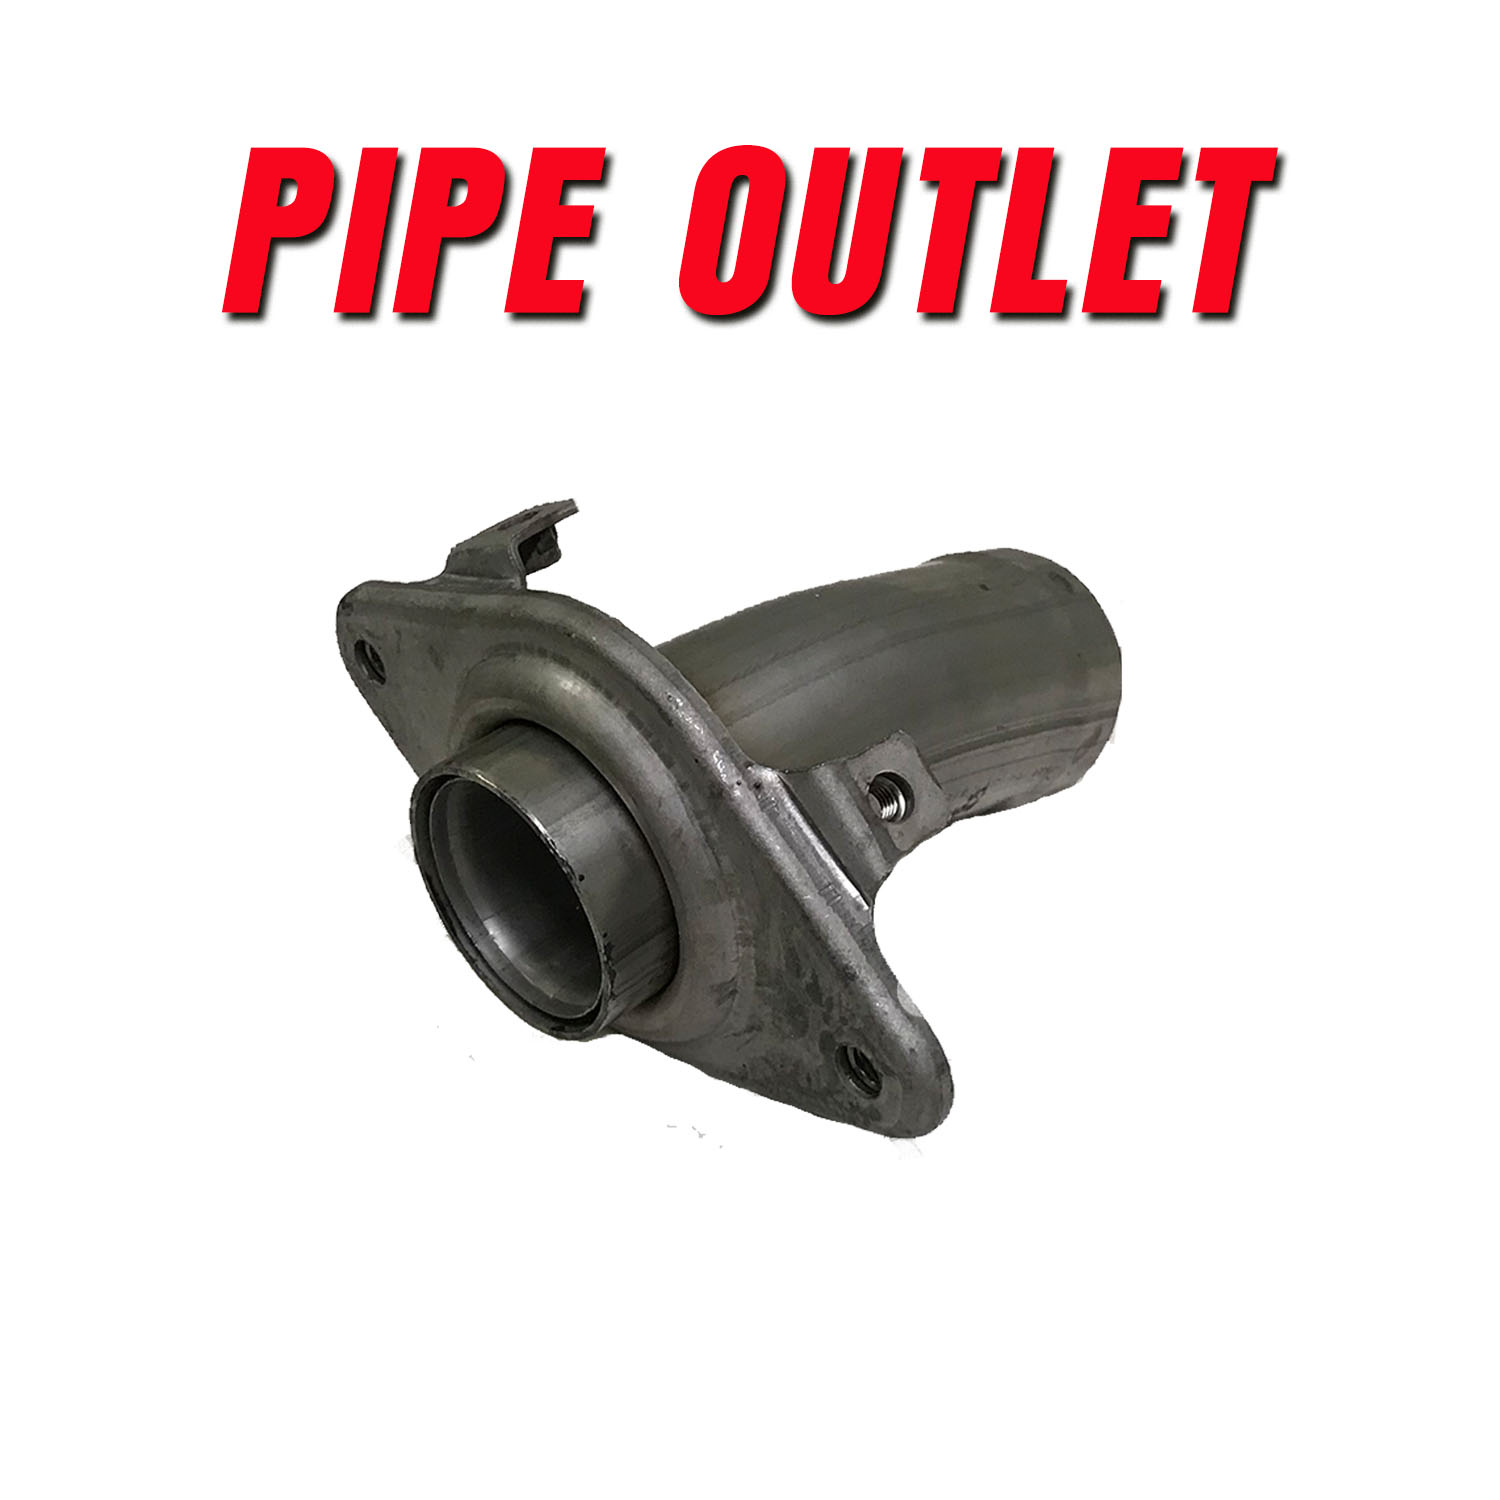 pipe outlet.jpg